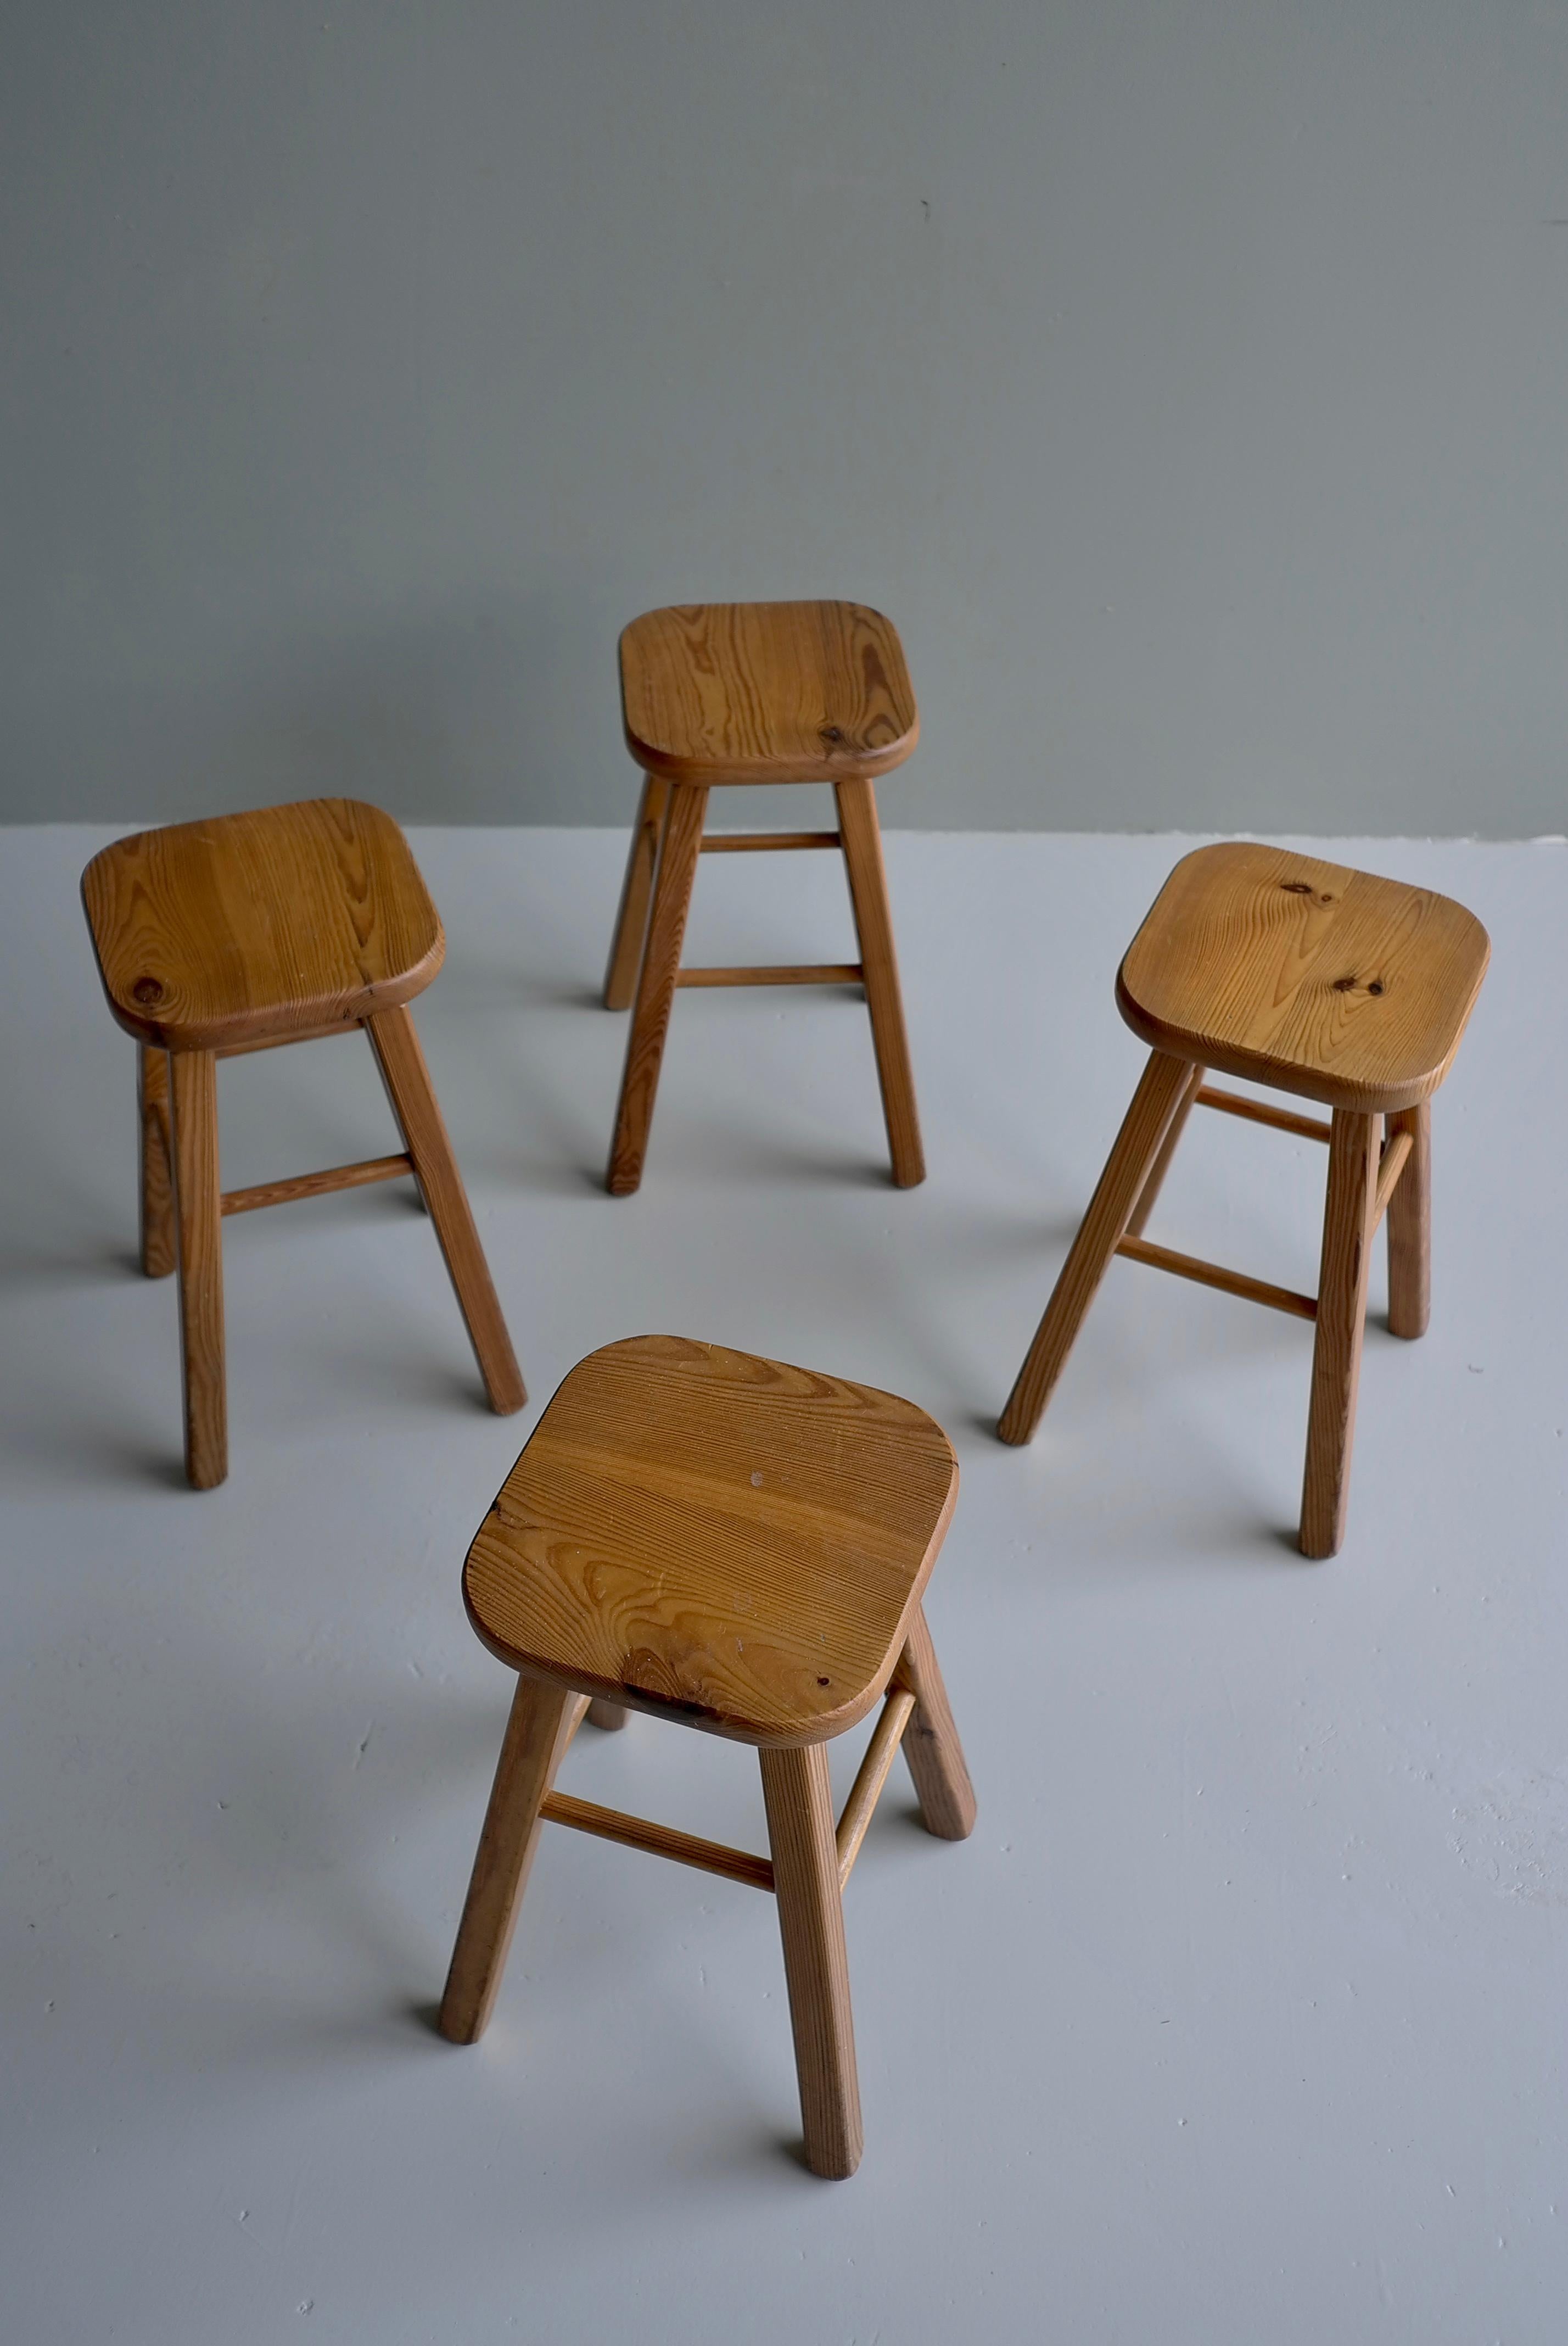 French Solid Pine Stools in style of Charlotte Perriand, France 1960's For Sale